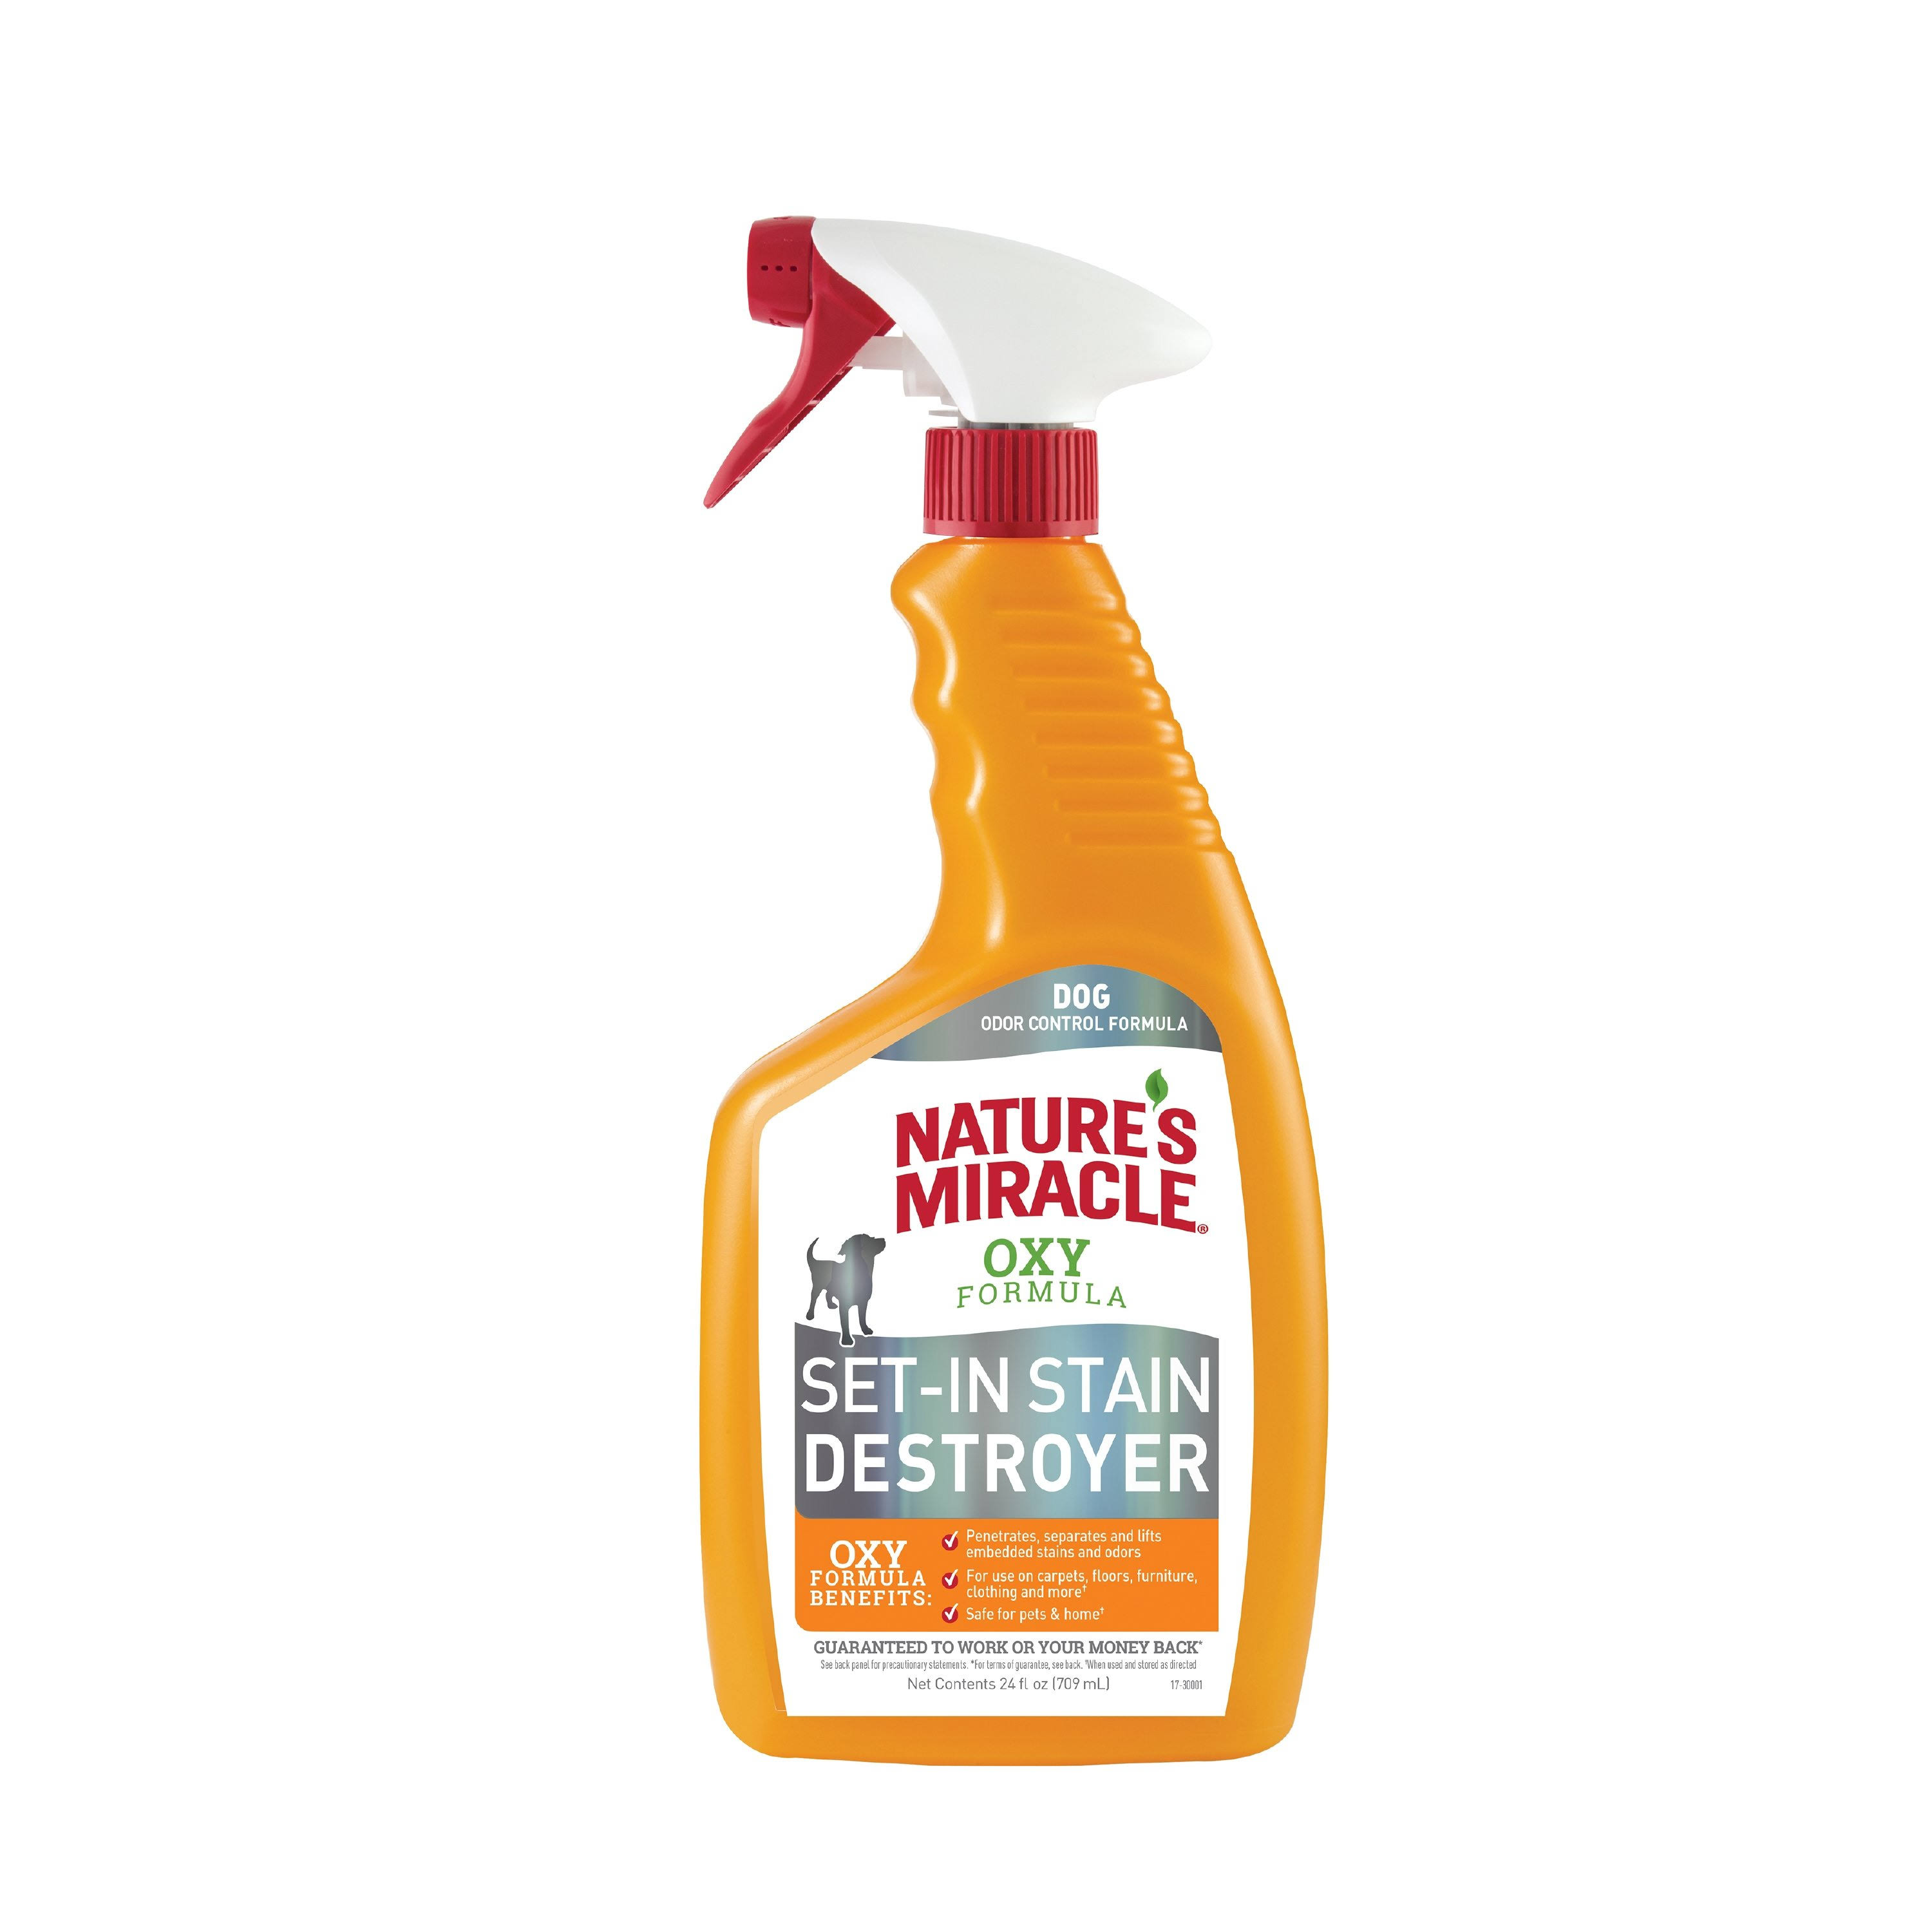 Nature’s Miracle P-98172 Set-In Stain Destroyer Dog, Oxy Formula with Orange, 24 oz